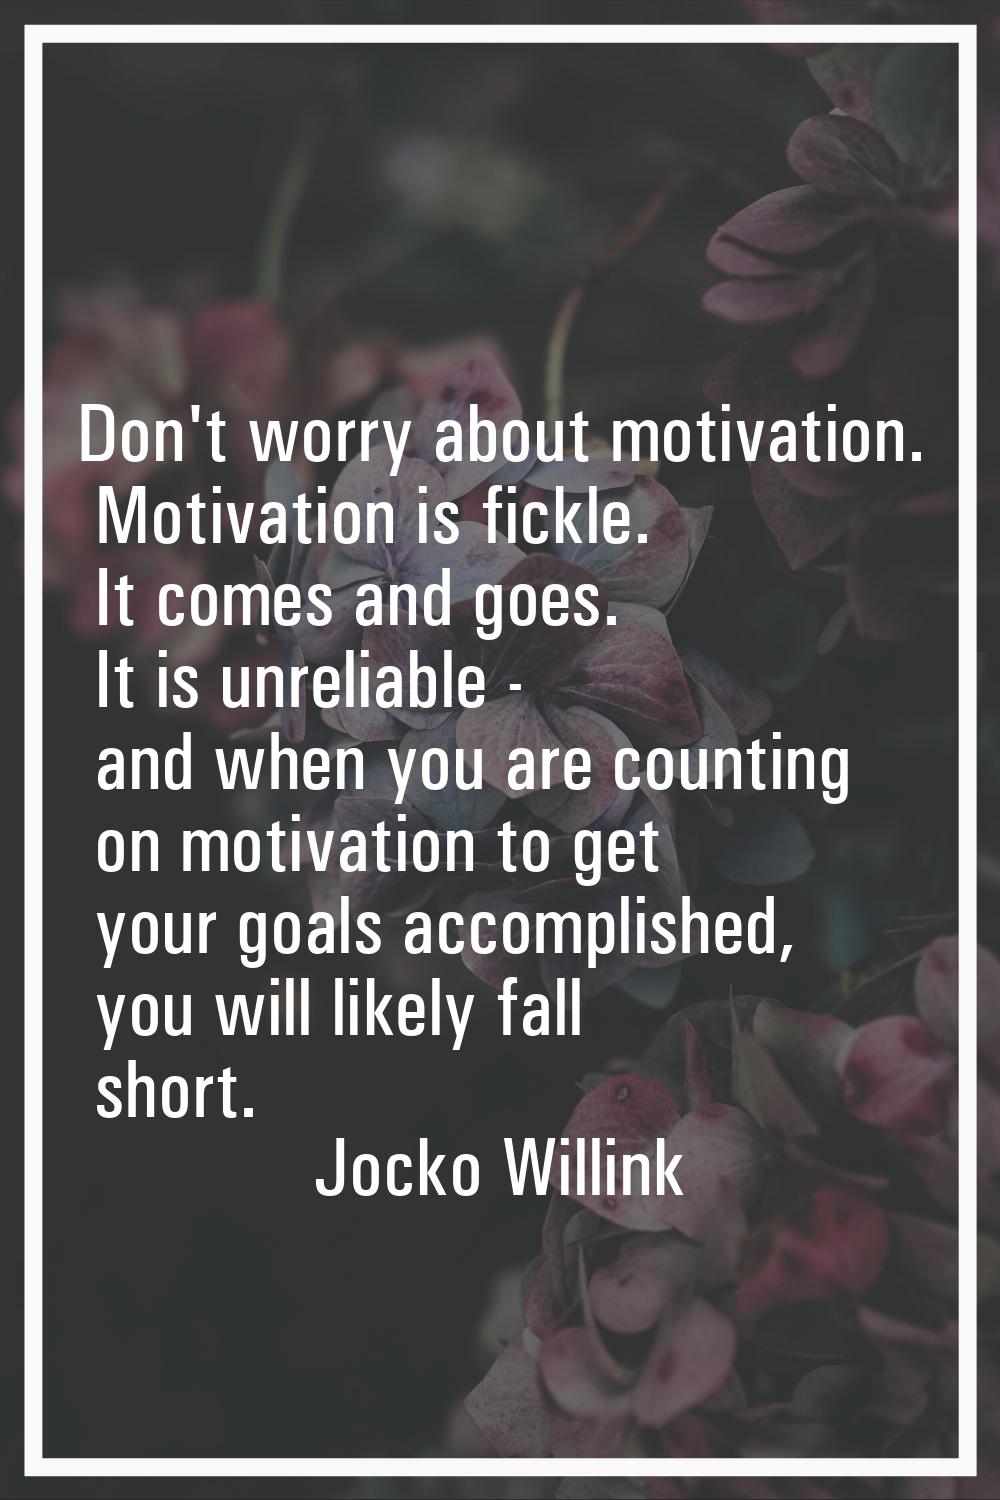 Don't worry about motivation. Motivation is fickle. It comes and goes. It is unreliable - and when 